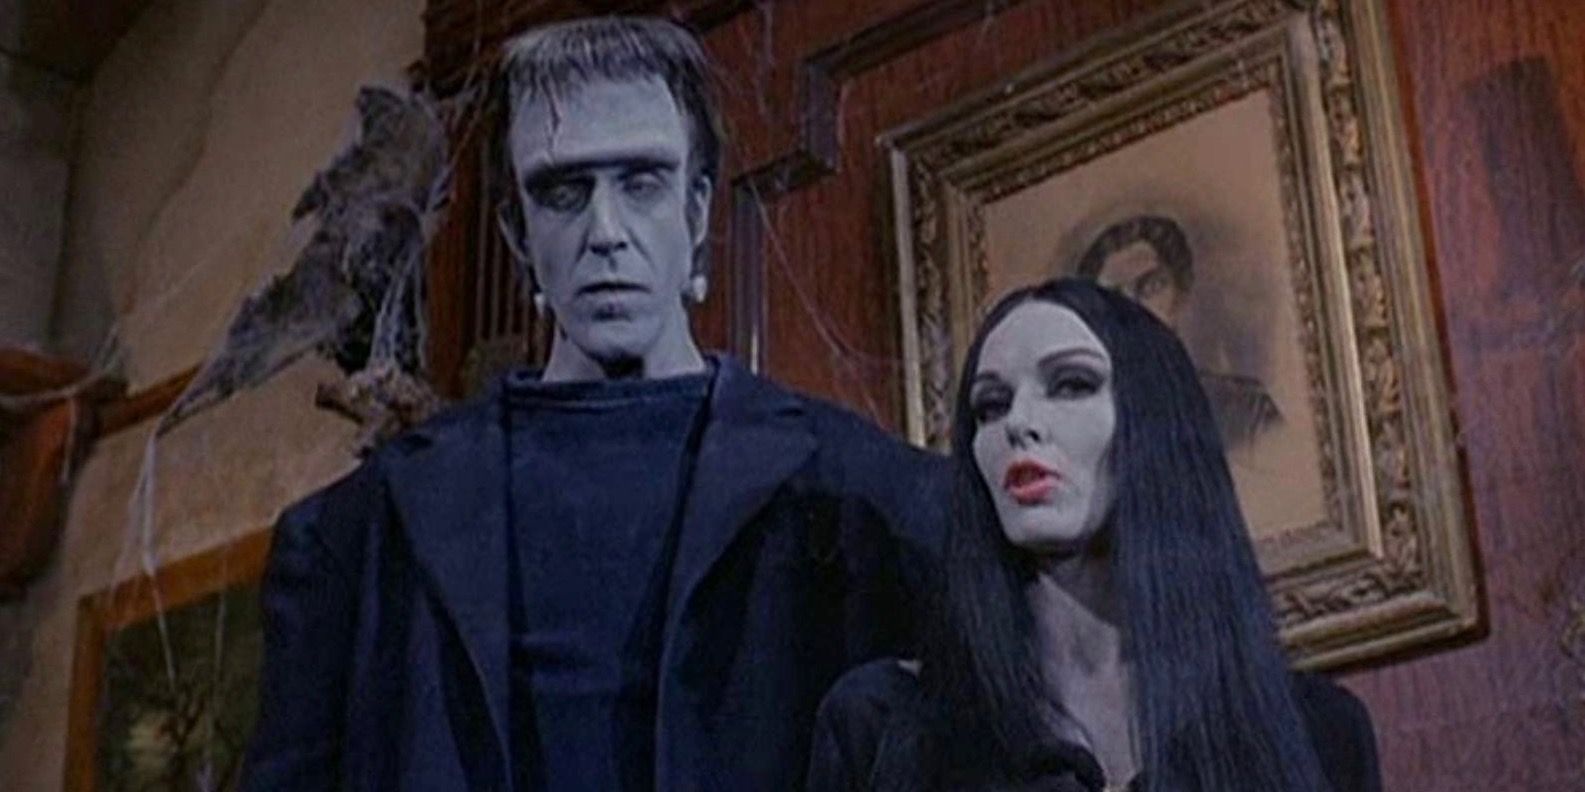 Fred Gwynne as Herman Munster and Joan Marshall as Phoebe Munster